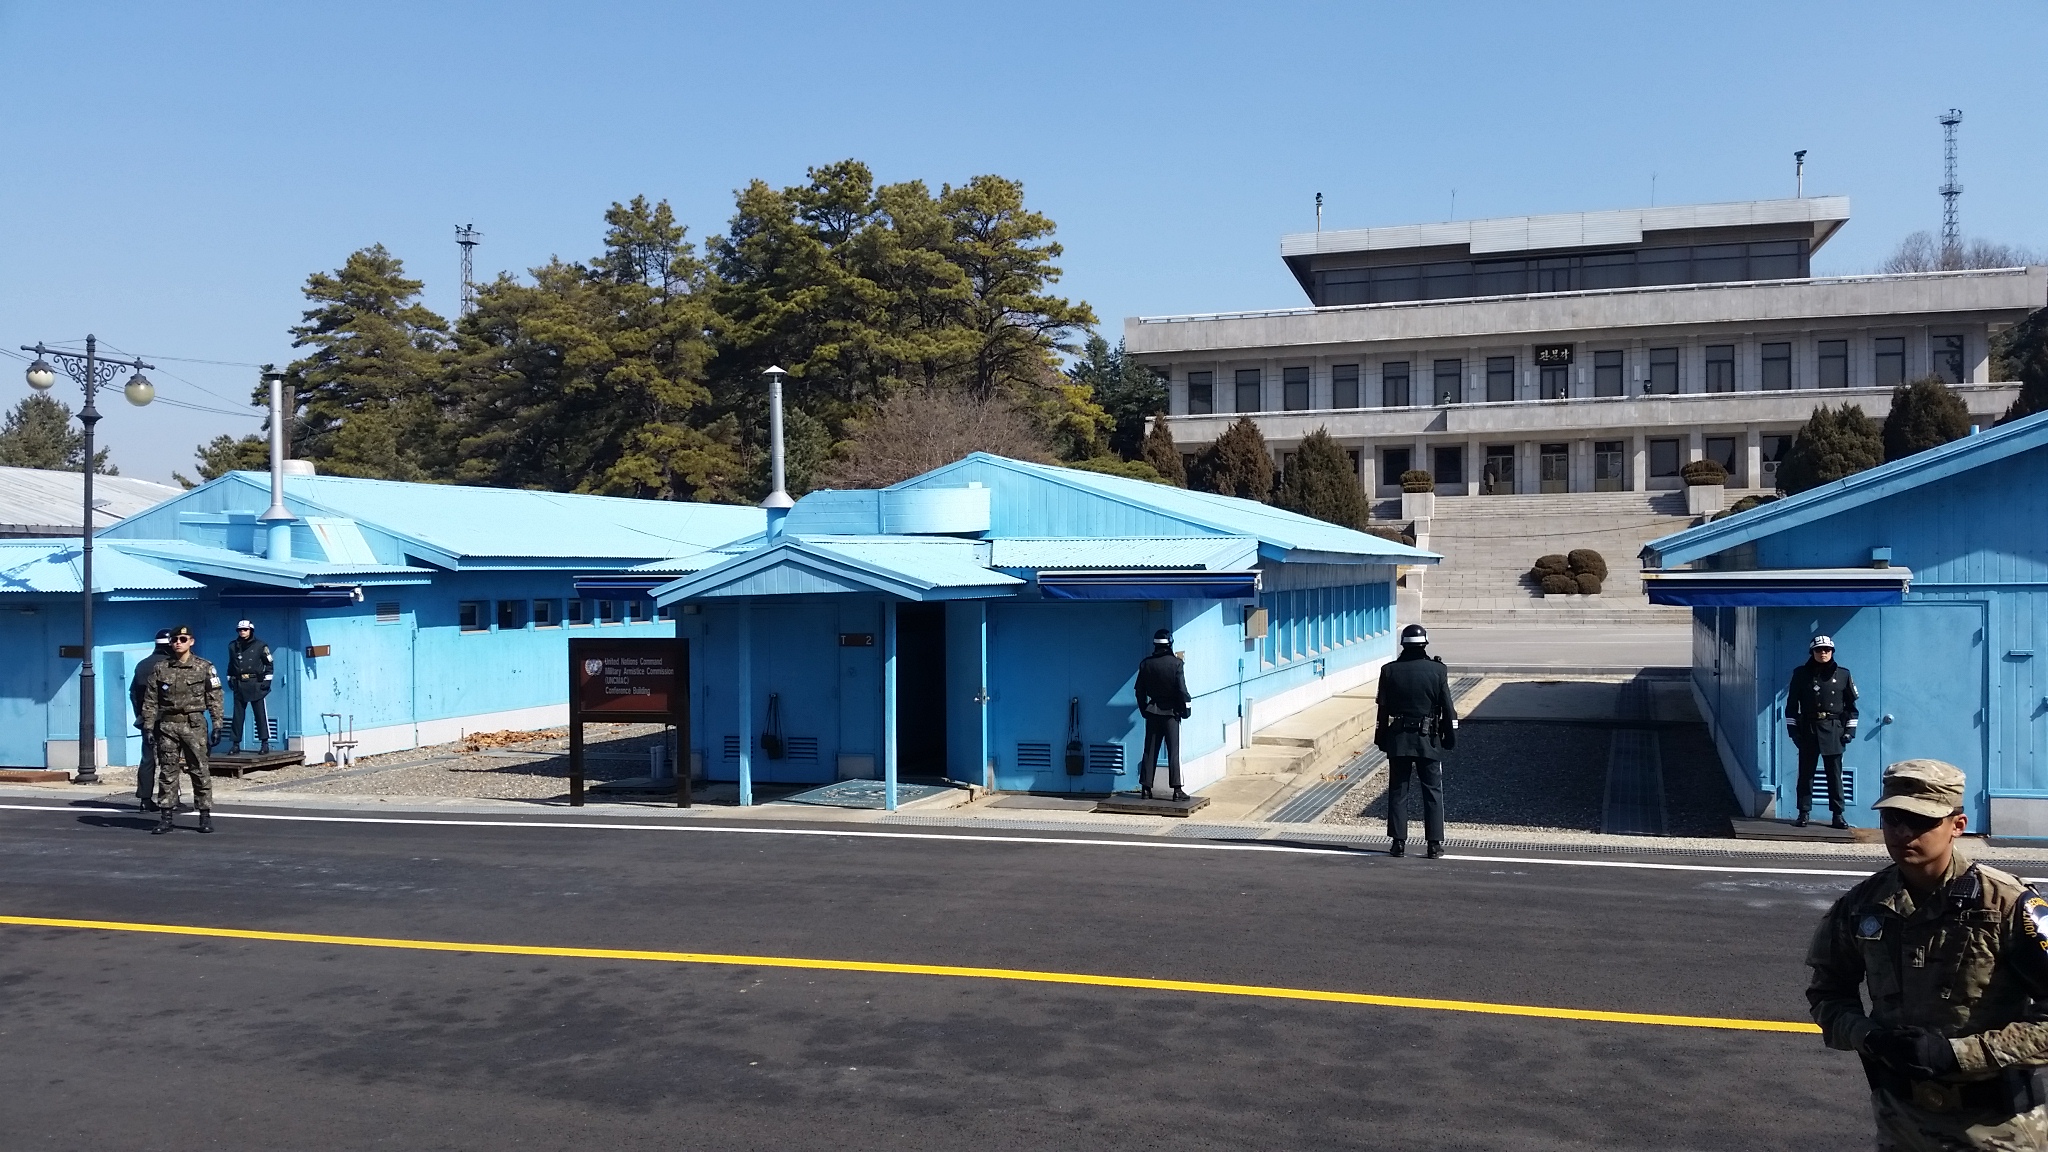 Building T-2, centered, at Panmunjom. Buildings T-1, T-2, and T-3 are visible in the picture as blue buildings in the foreground. In the background is North Korea's large building at Panmunjom.